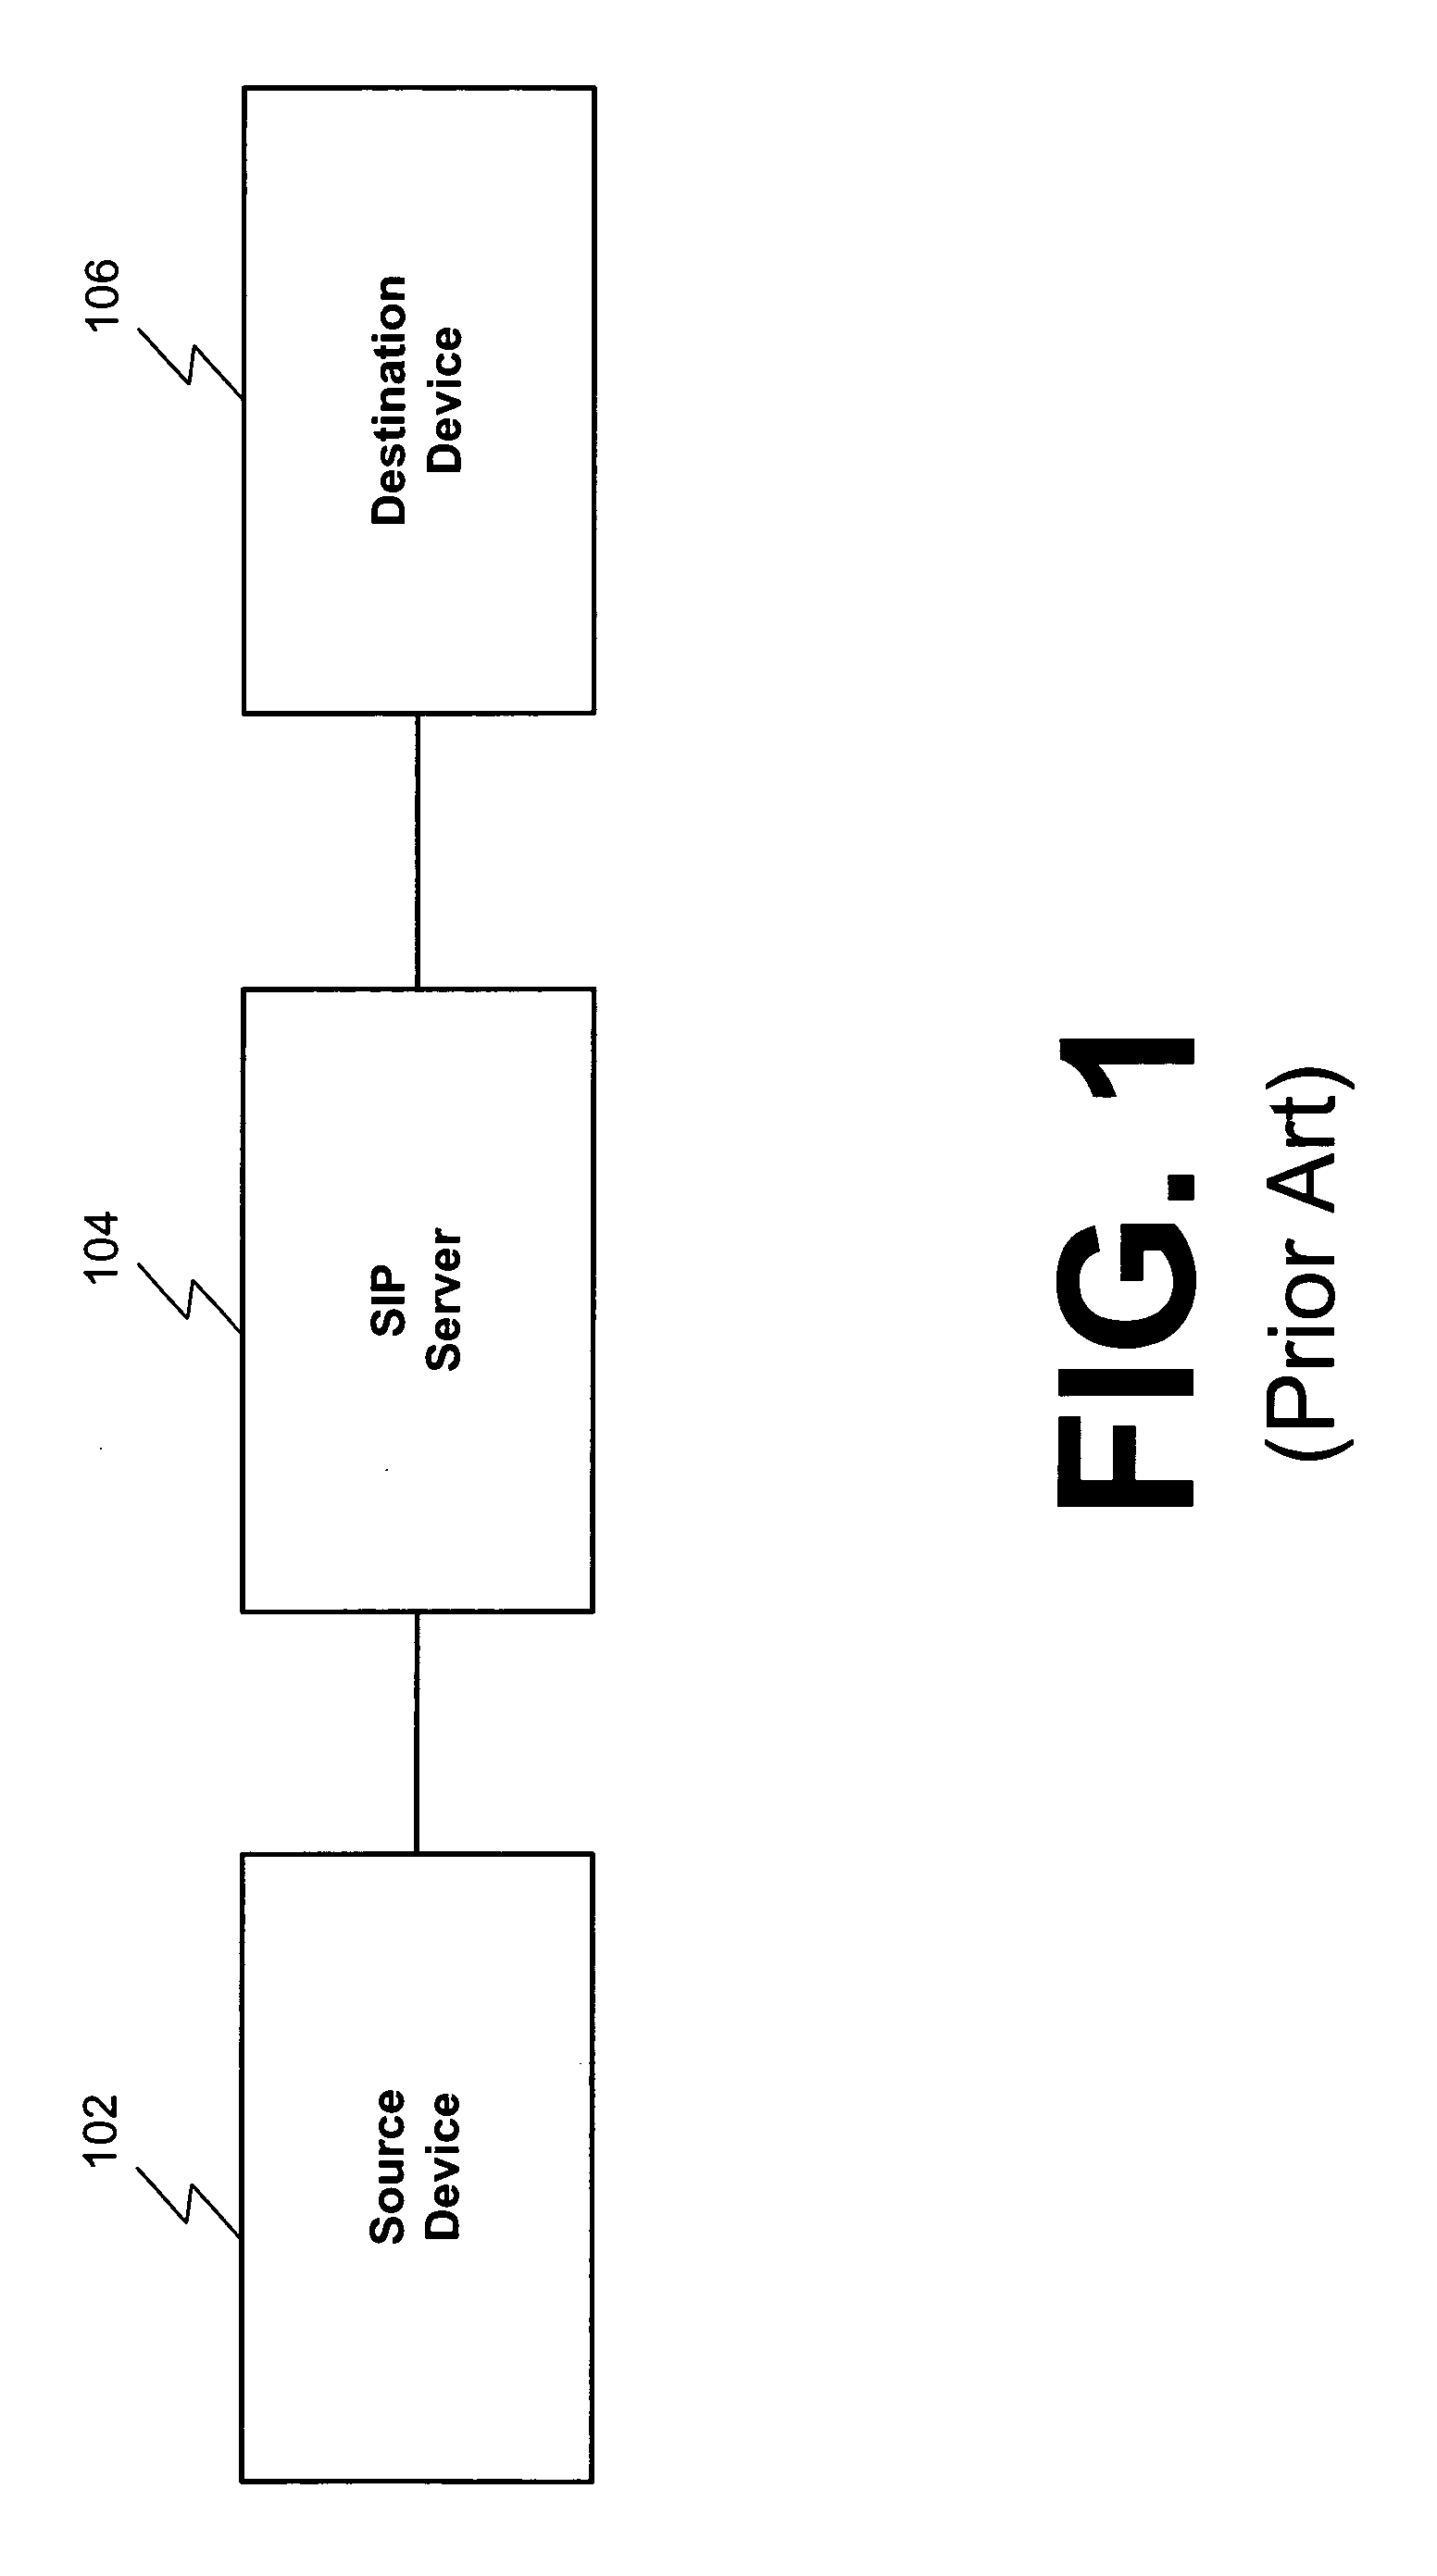 System and method for load balancing a communications network